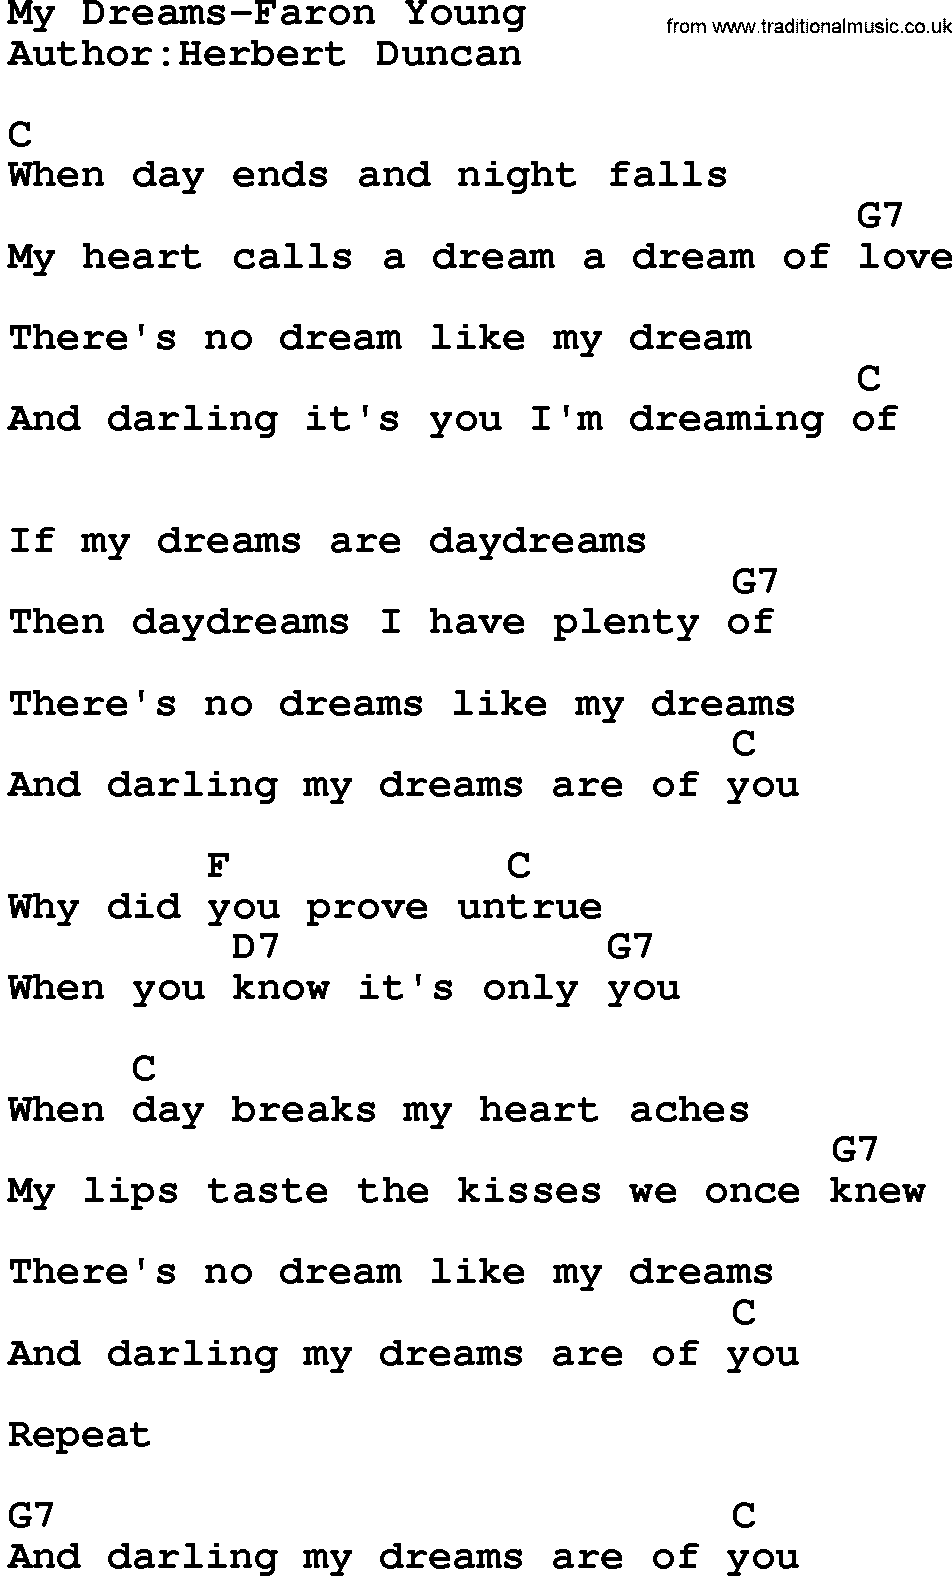 Country music song: My Dreams-Faron Young lyrics and chords